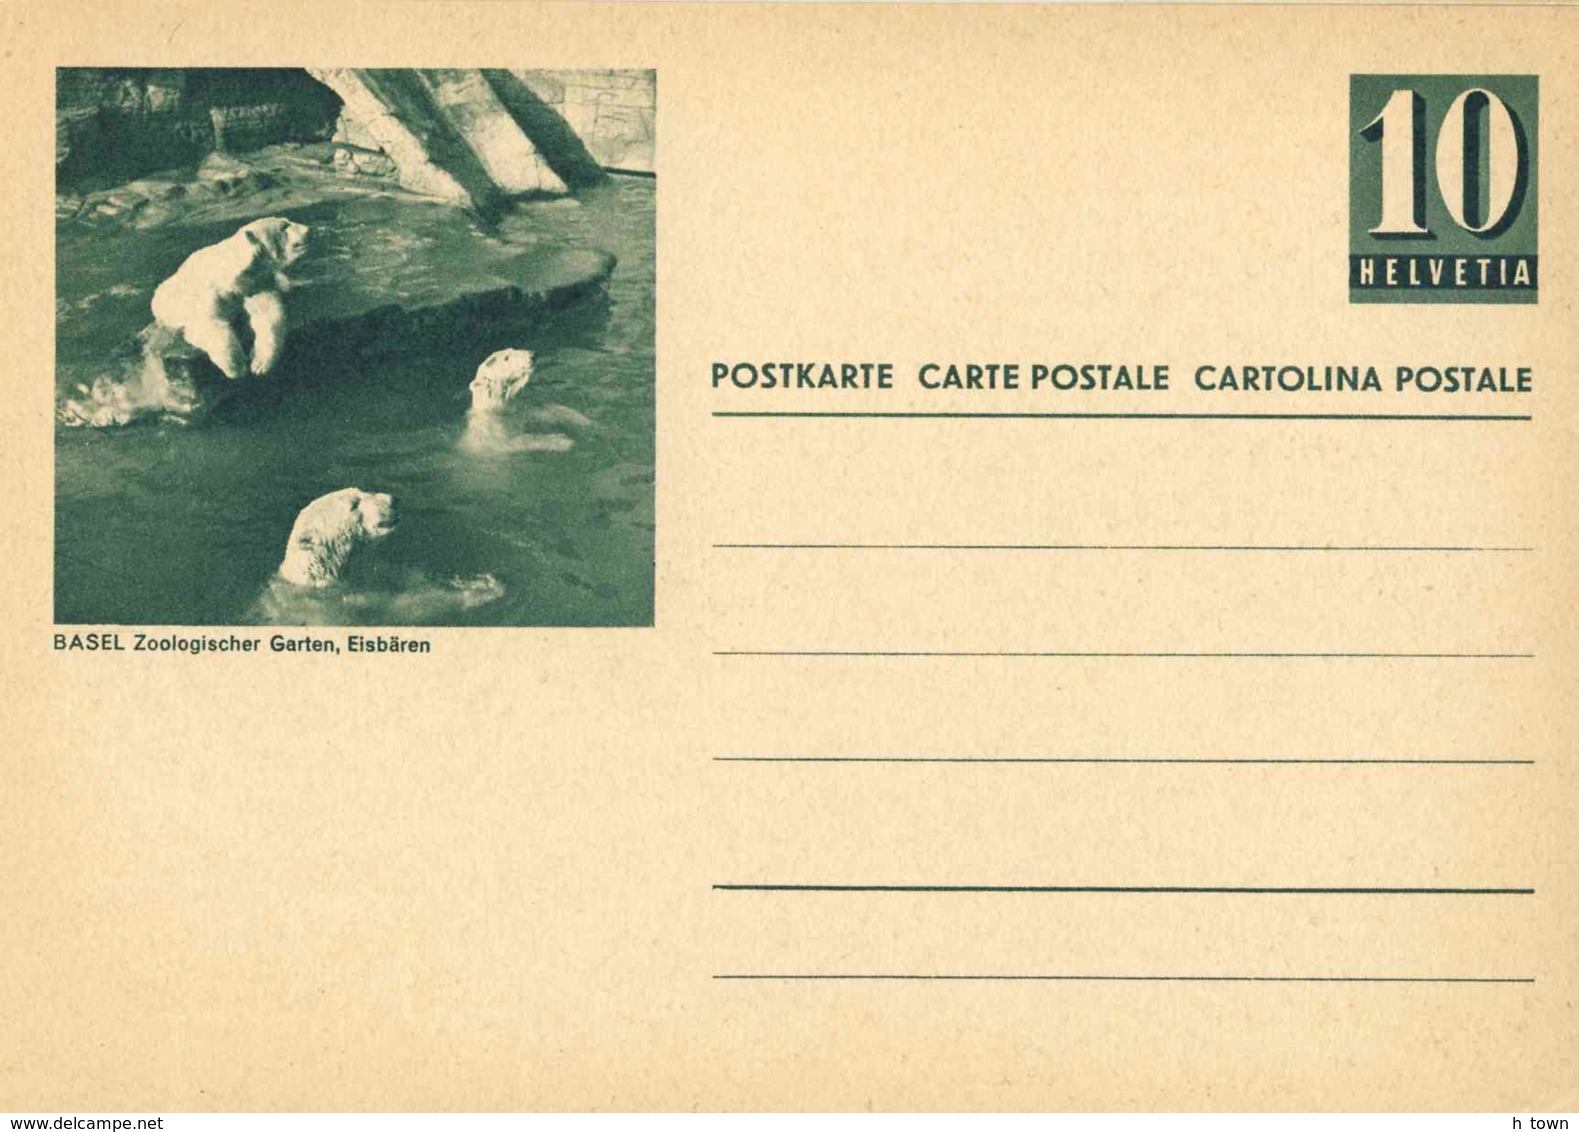 922  Ours Polaire, Zoo: Entier (c.p.) Suisse -  Polar Bear, Basel Zoo Stationery Postcard - Ours